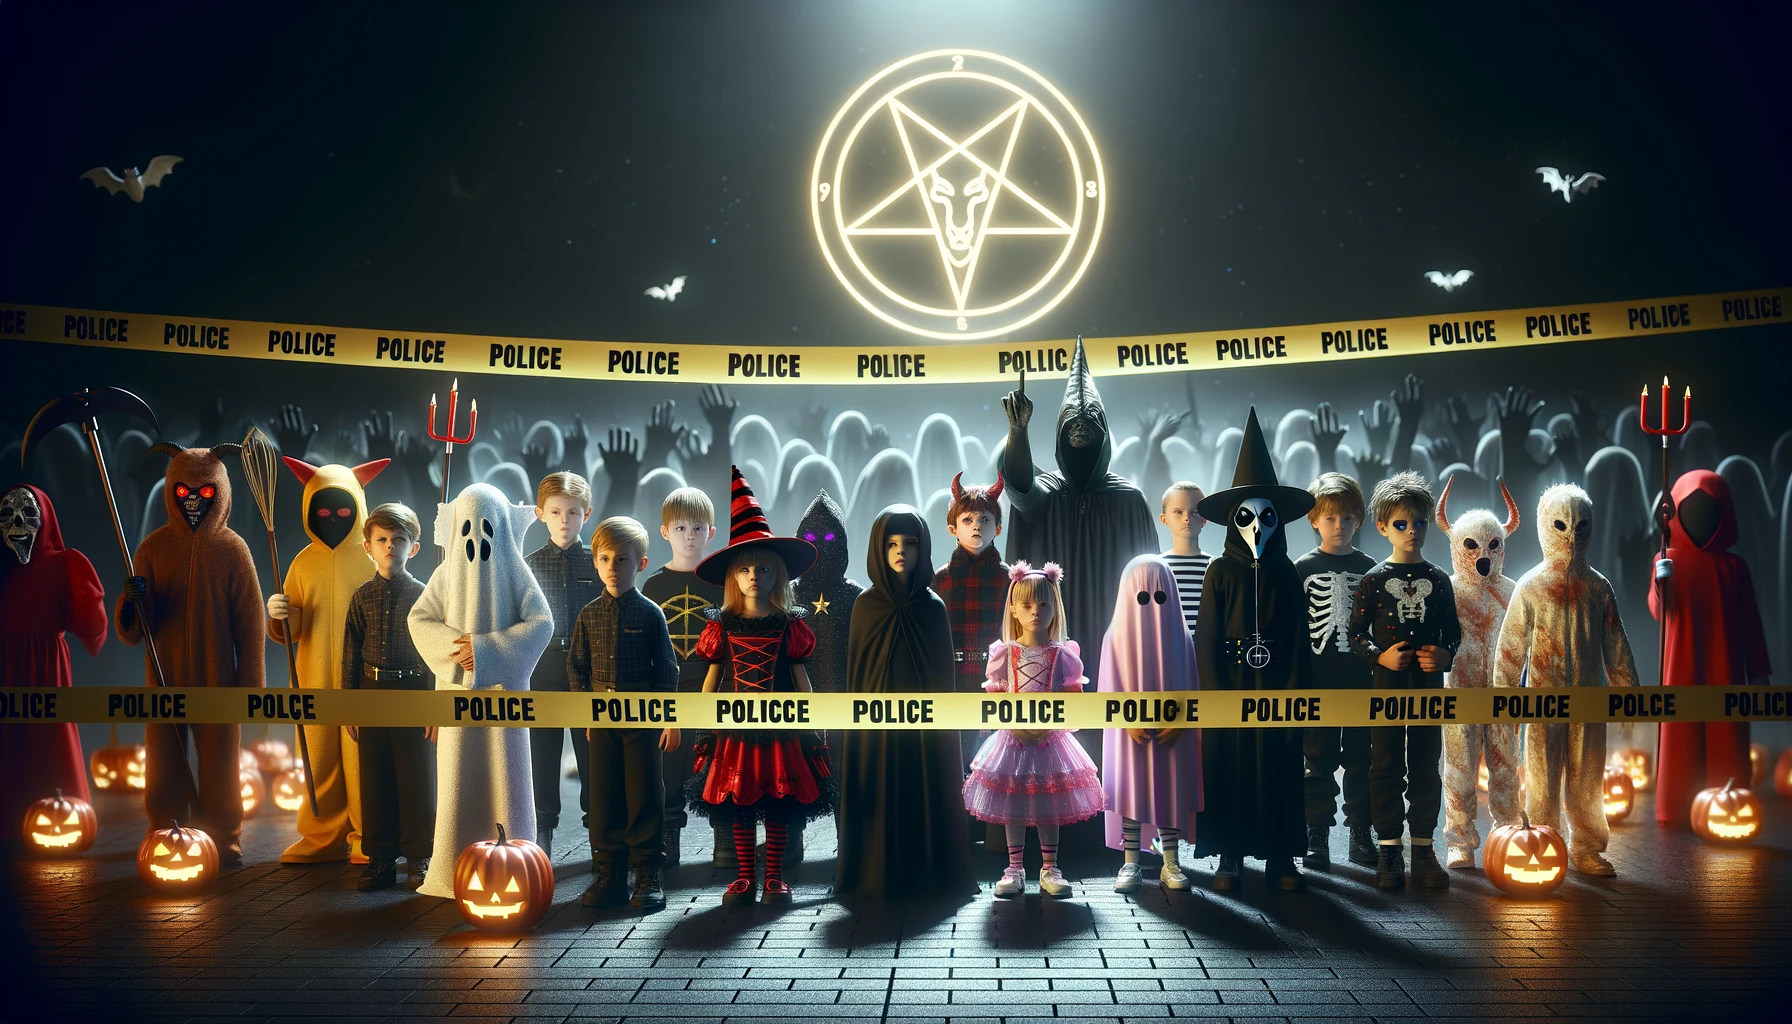 Dall·e 2023 11 01 17.25.12 Realistic Image Of Children In Halloween Costumes Gathered Behind Police Tape. The Scene Is Set At Night With An Ominous Glow. Among The Kids There A -